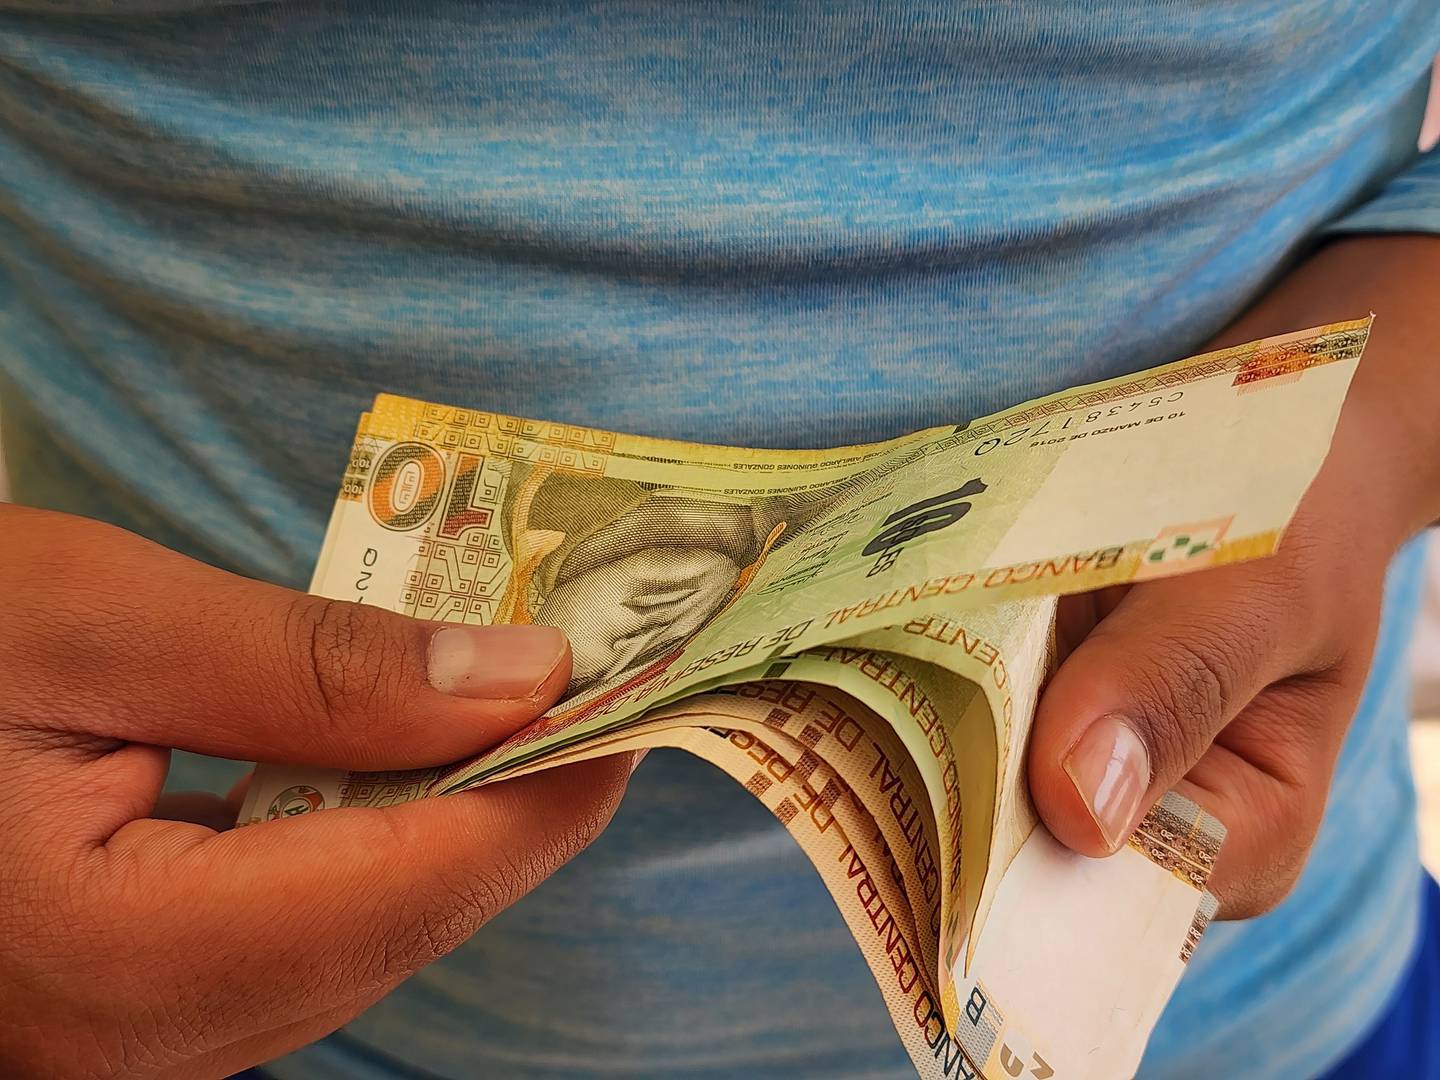 hands of a man holding and counting peruvian banknotes